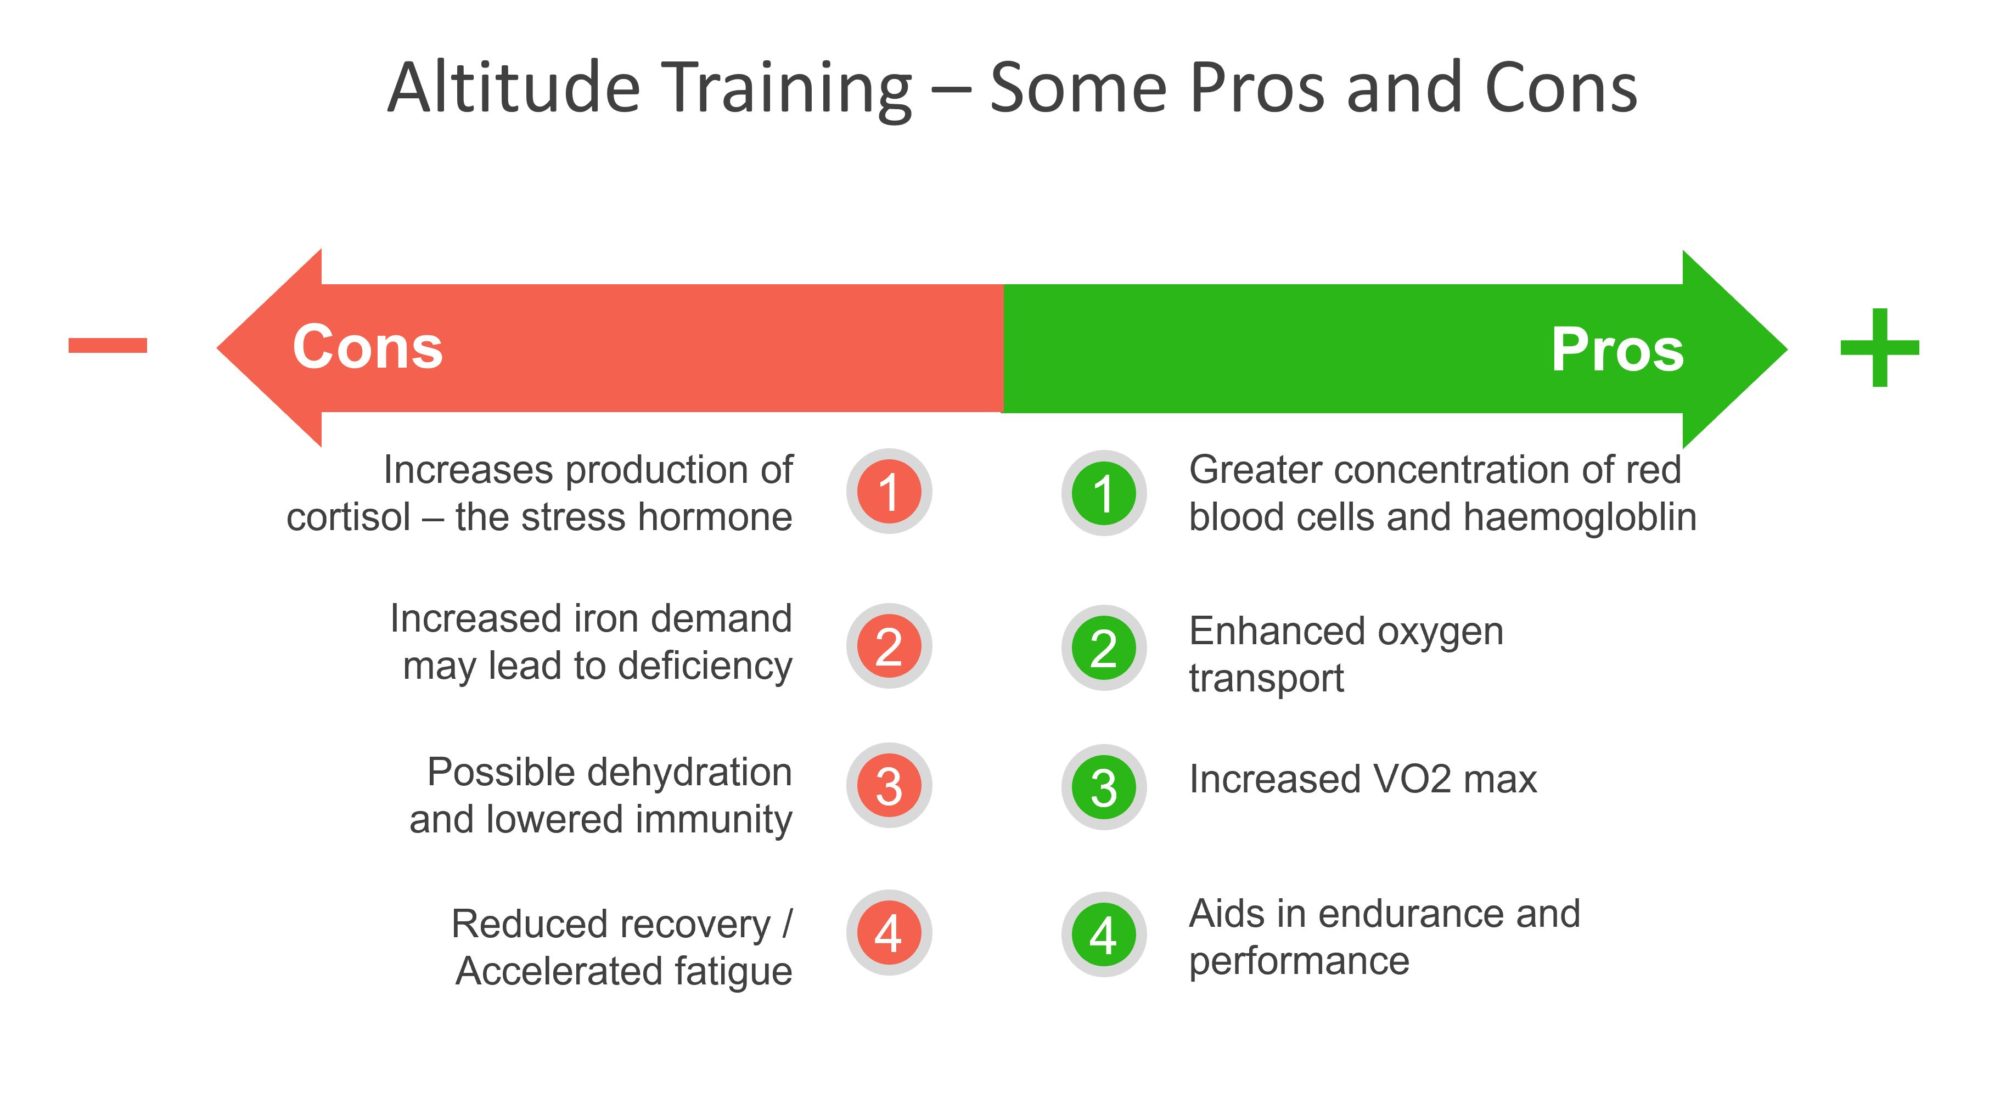 II. Benefits of Training at High Elevations